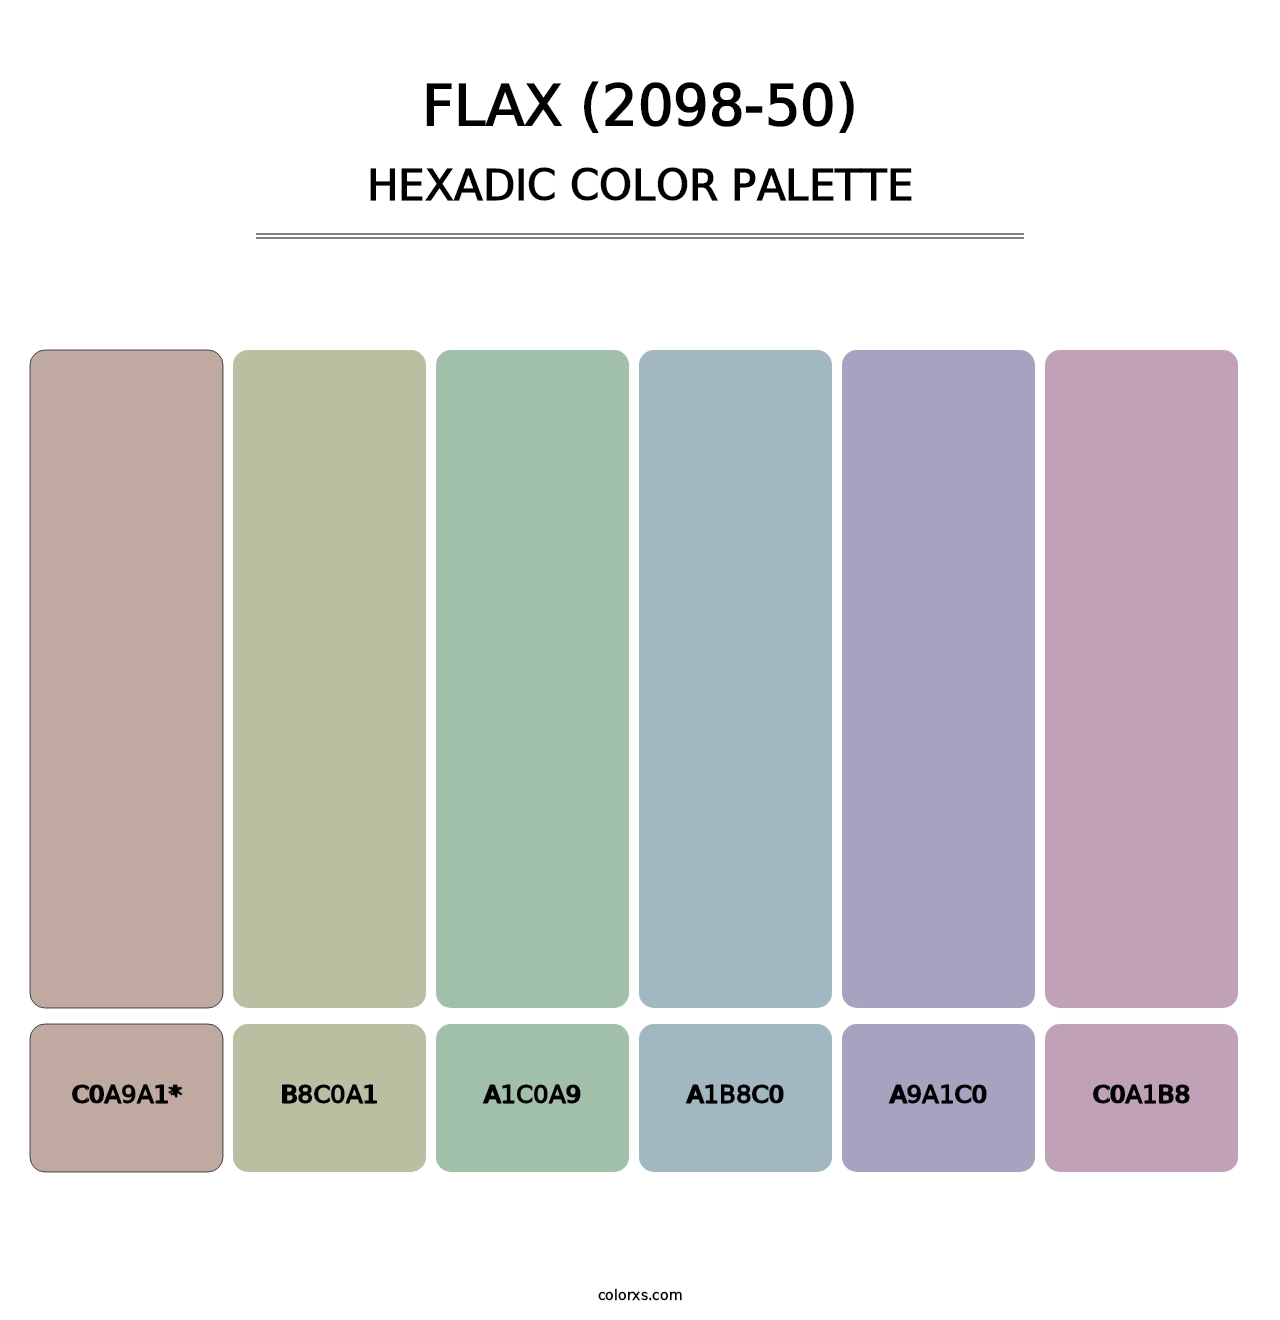 Flax (2098-50) - Hexadic Color Palette